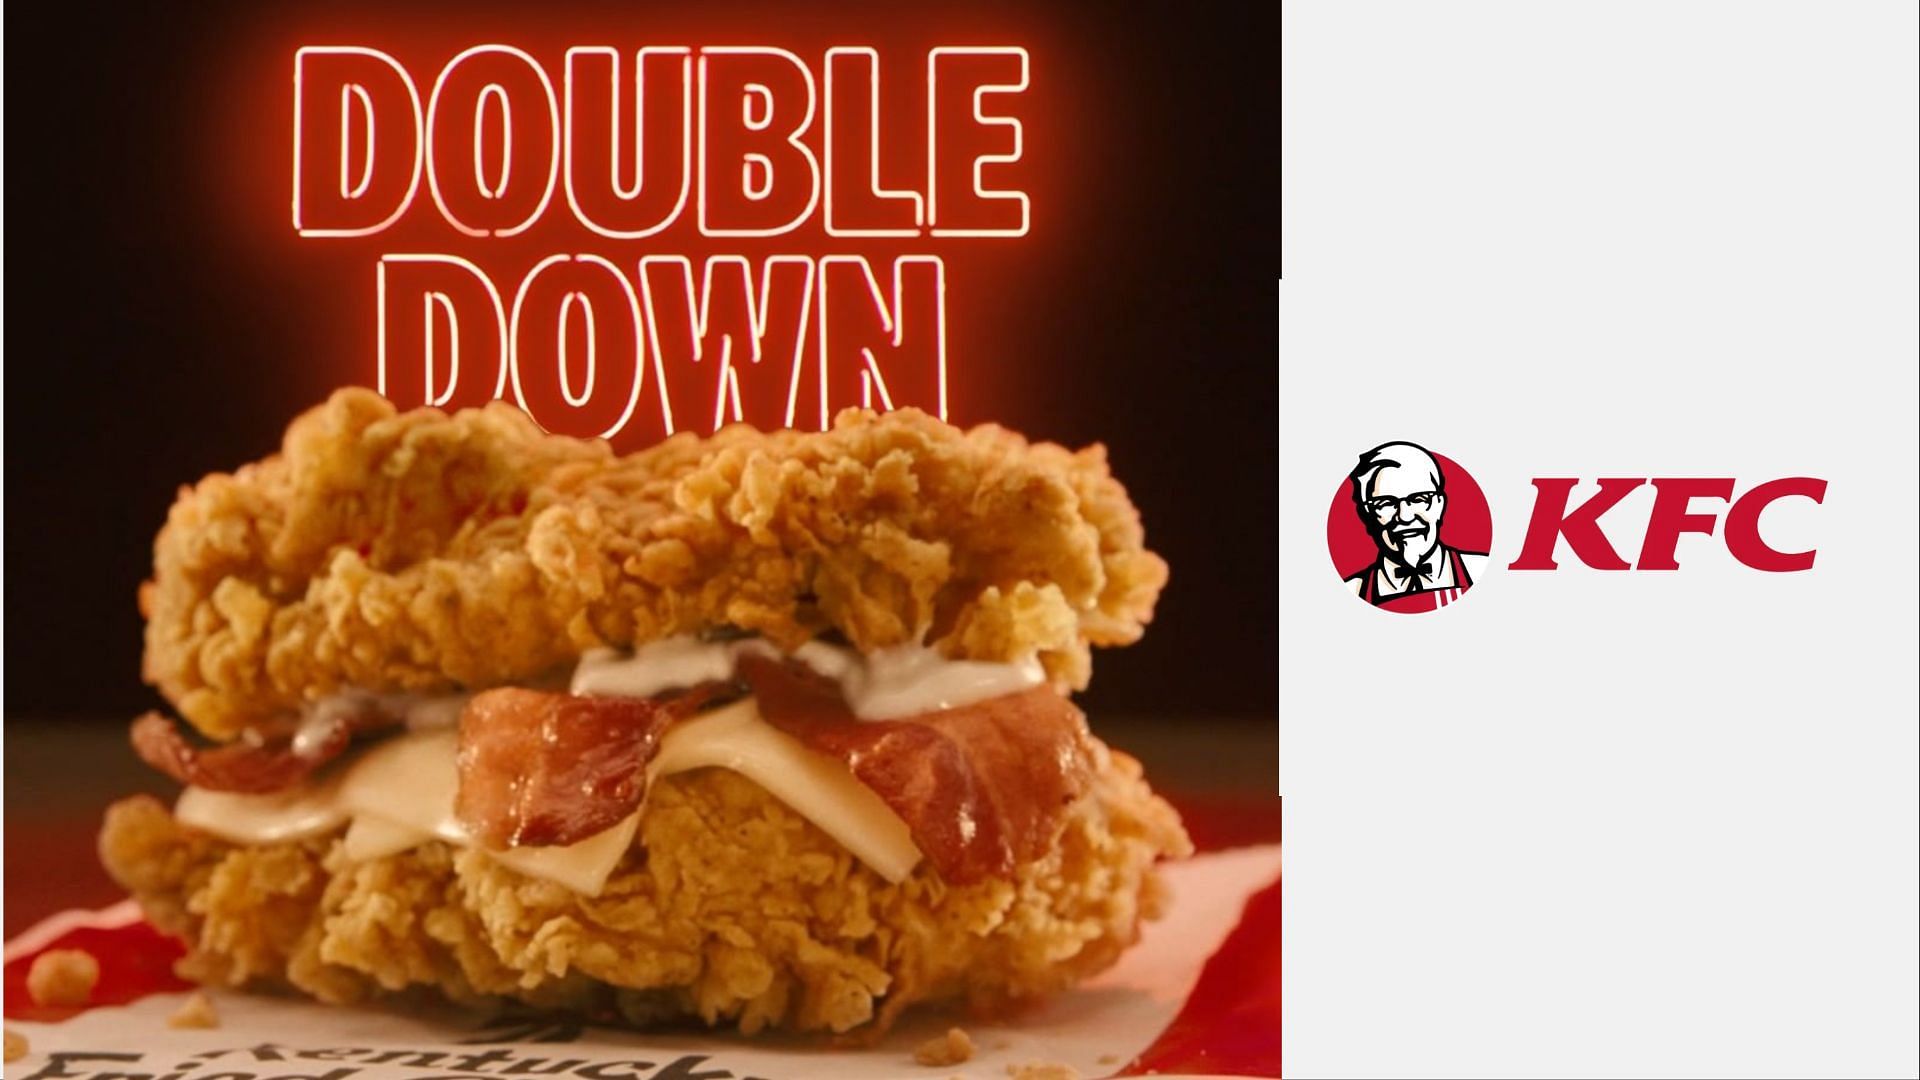 KFC is bringing back the Double Down burger for a limited time starting March 6, 2023 (Image via KFC)